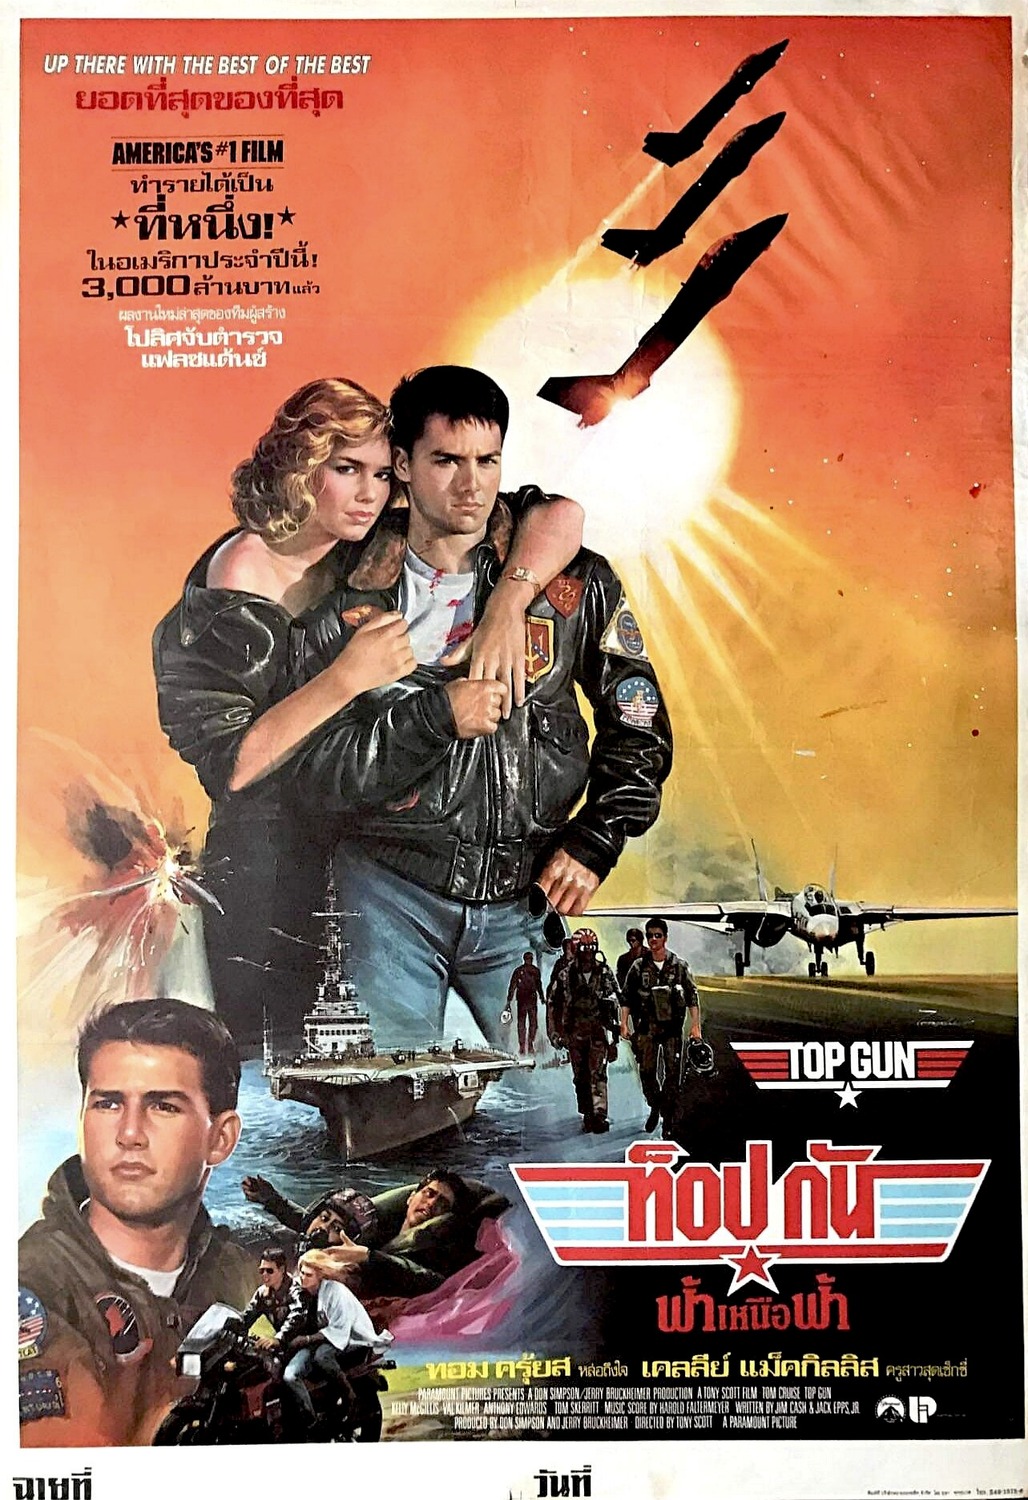 Extra Large Movie Poster Image for Top Gun (#8 of 8)